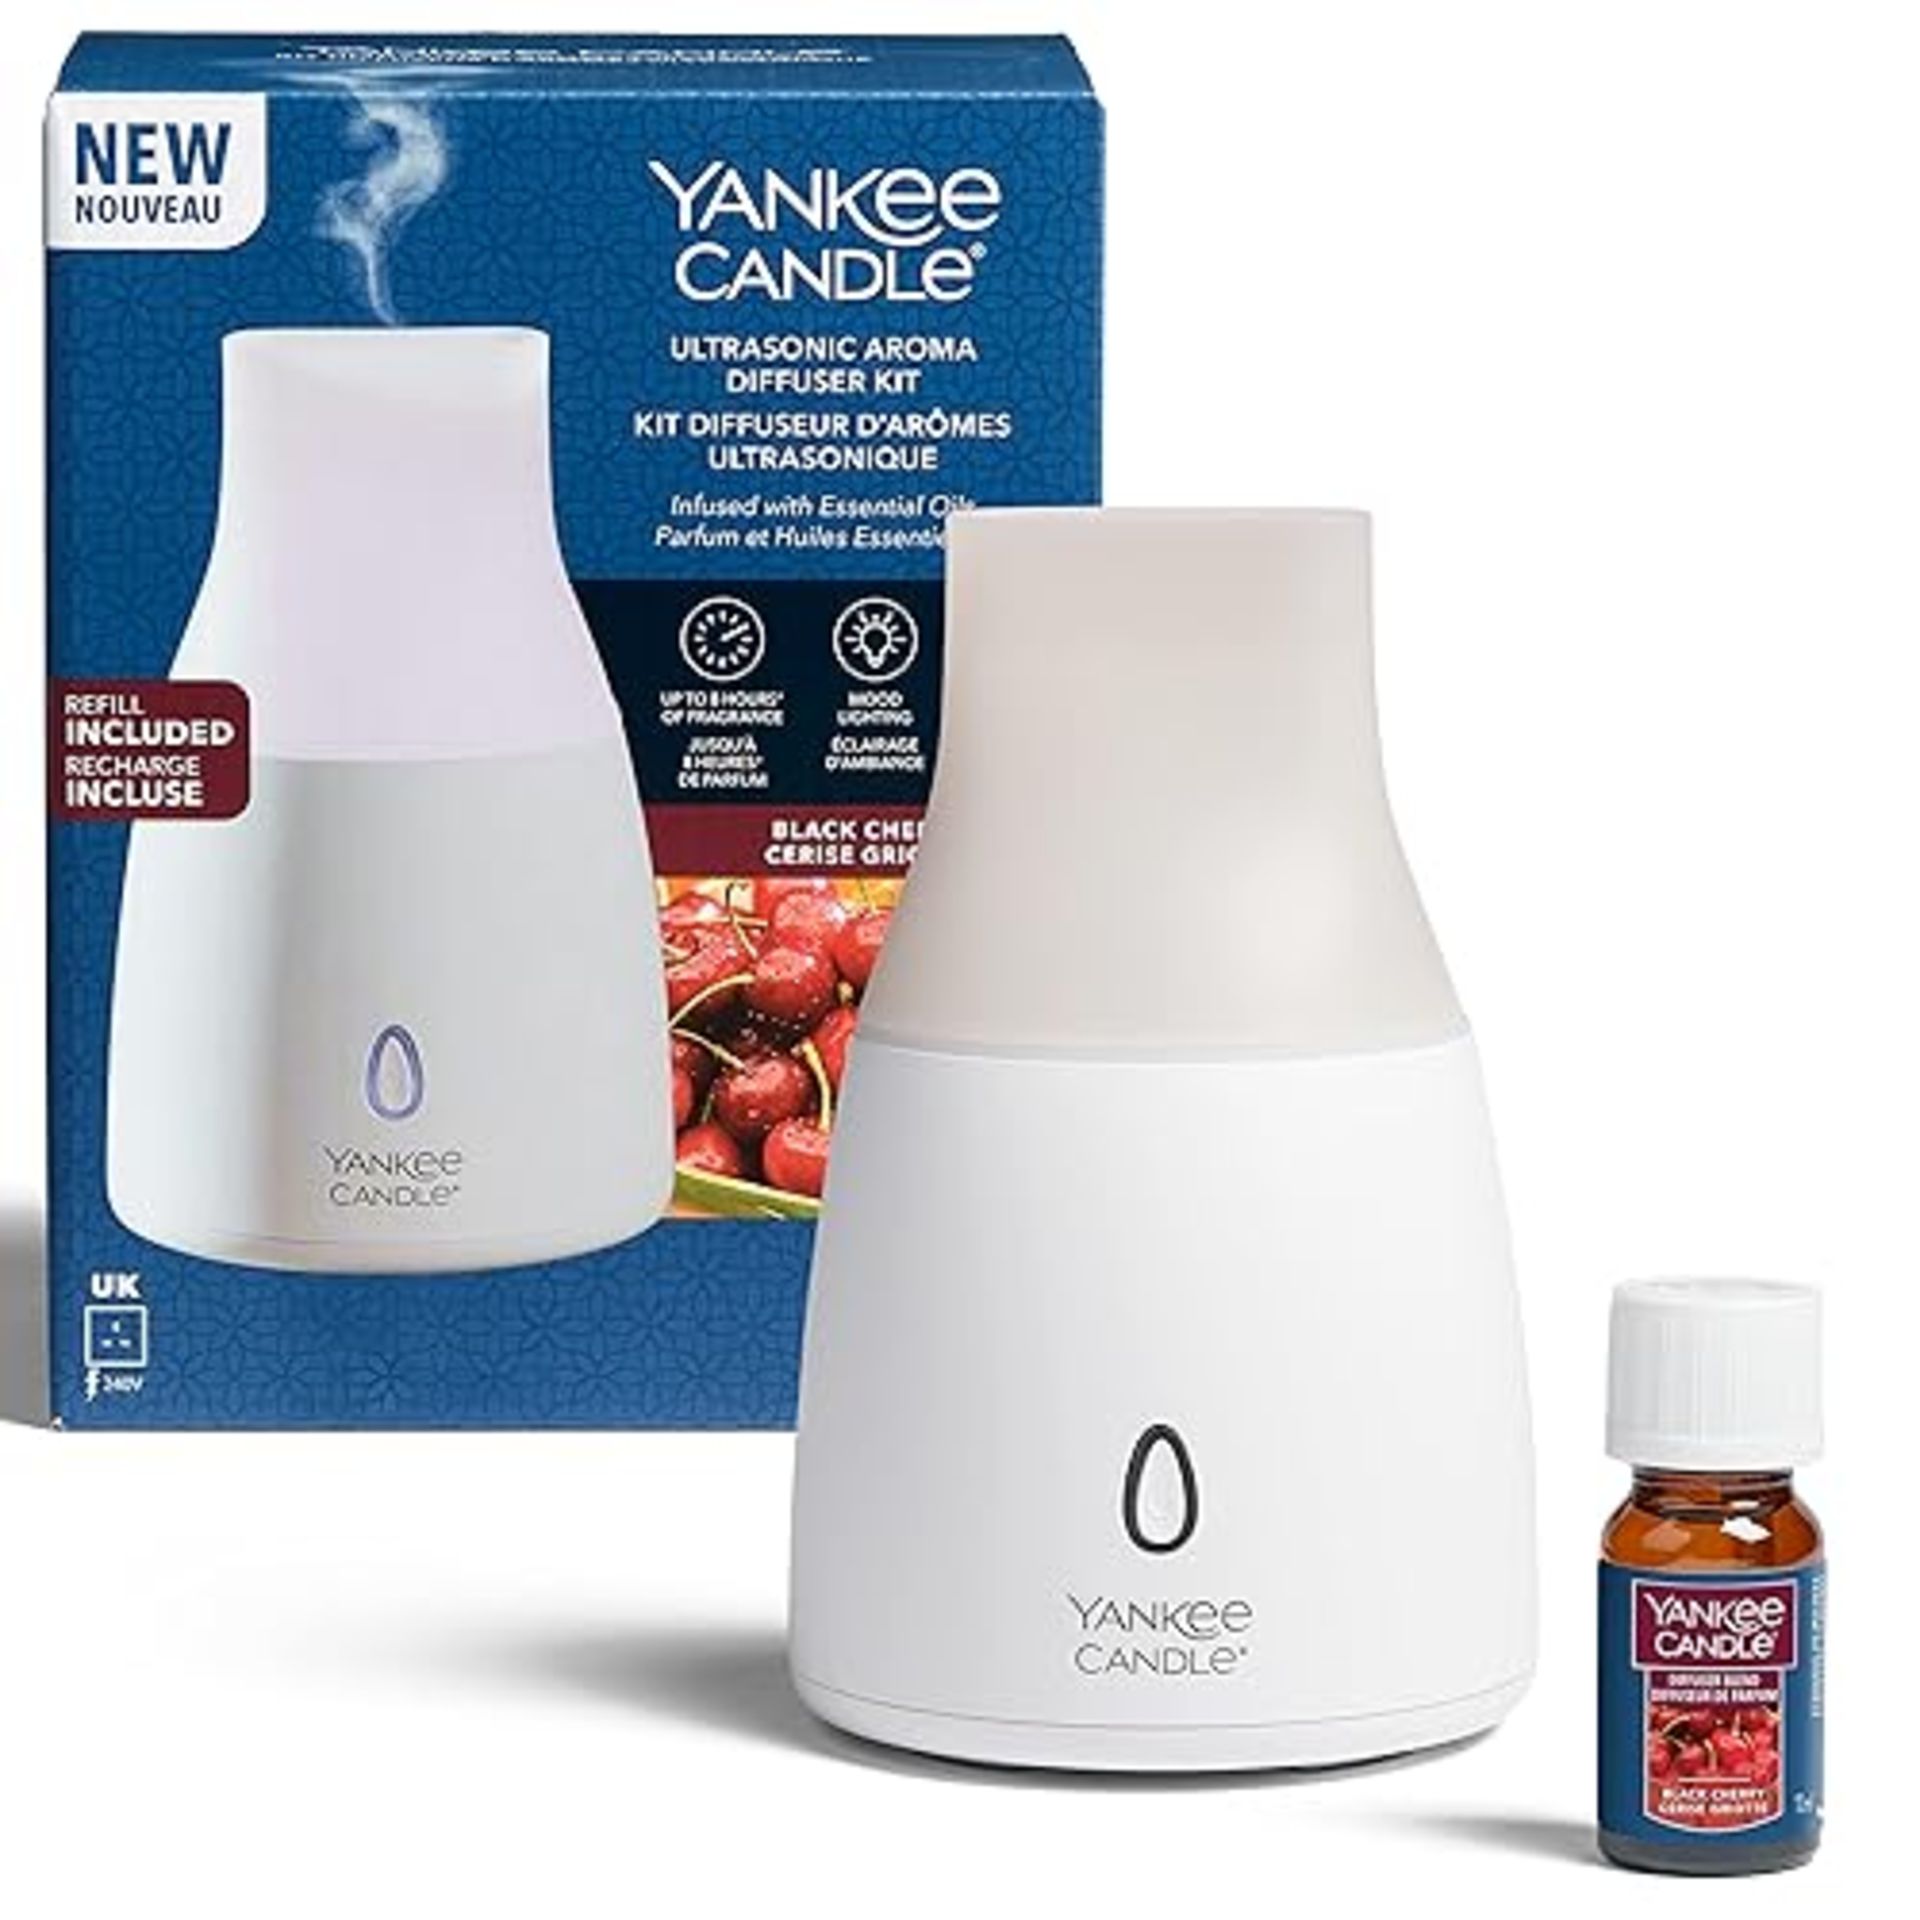 Yankee Candle Ultrasonic Aroma Diffuser Kit | Black Cherry Aroma Diffuser Oil | LED Colour Changing